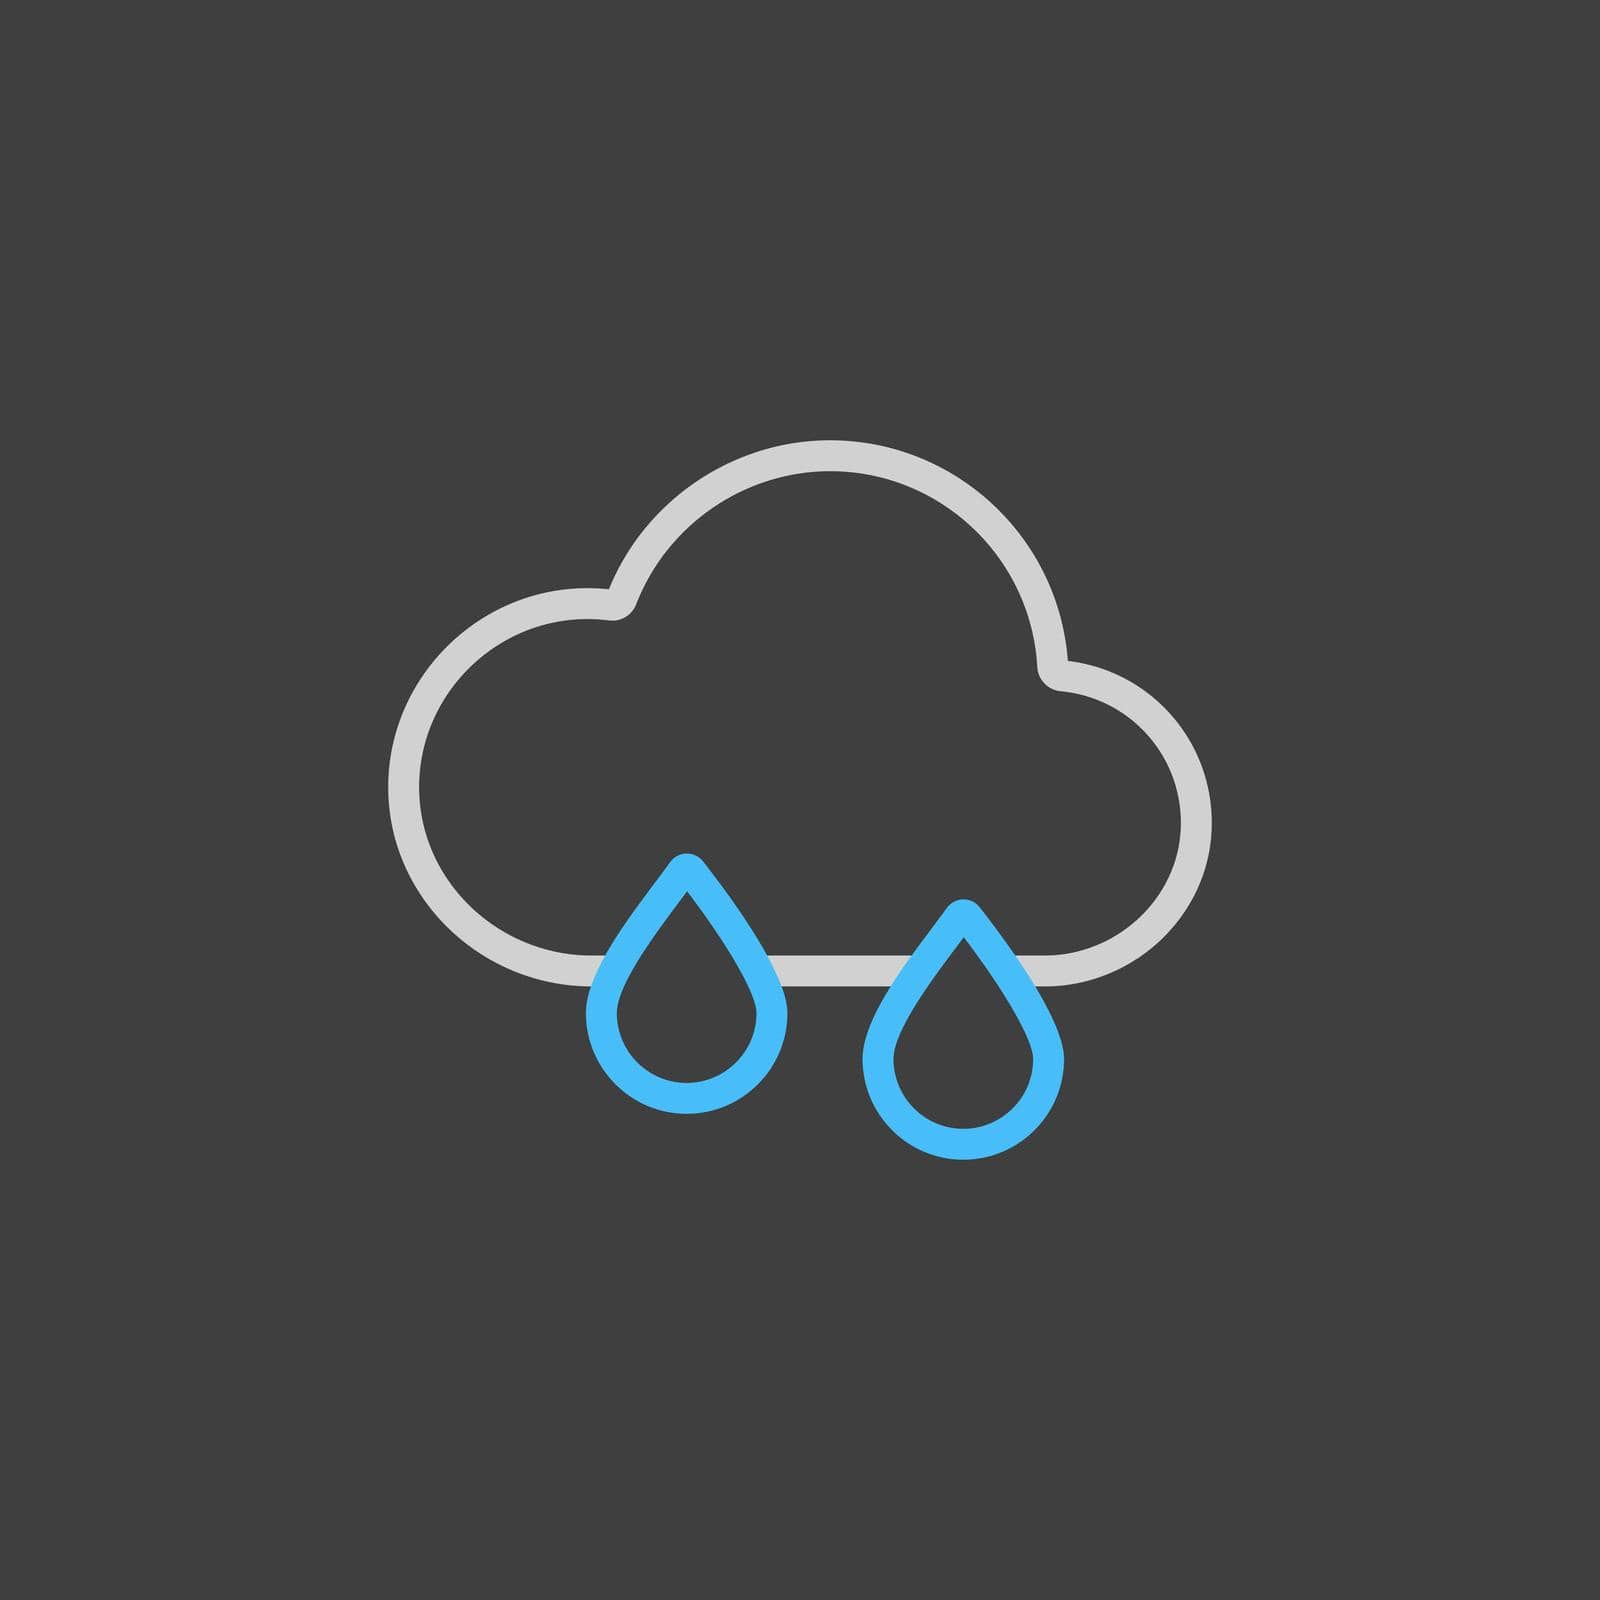 Raincloud with raindrops vector icon on dark background. Meteorology sign. Graph symbol for travel, tourism and weather web site and apps design, UI